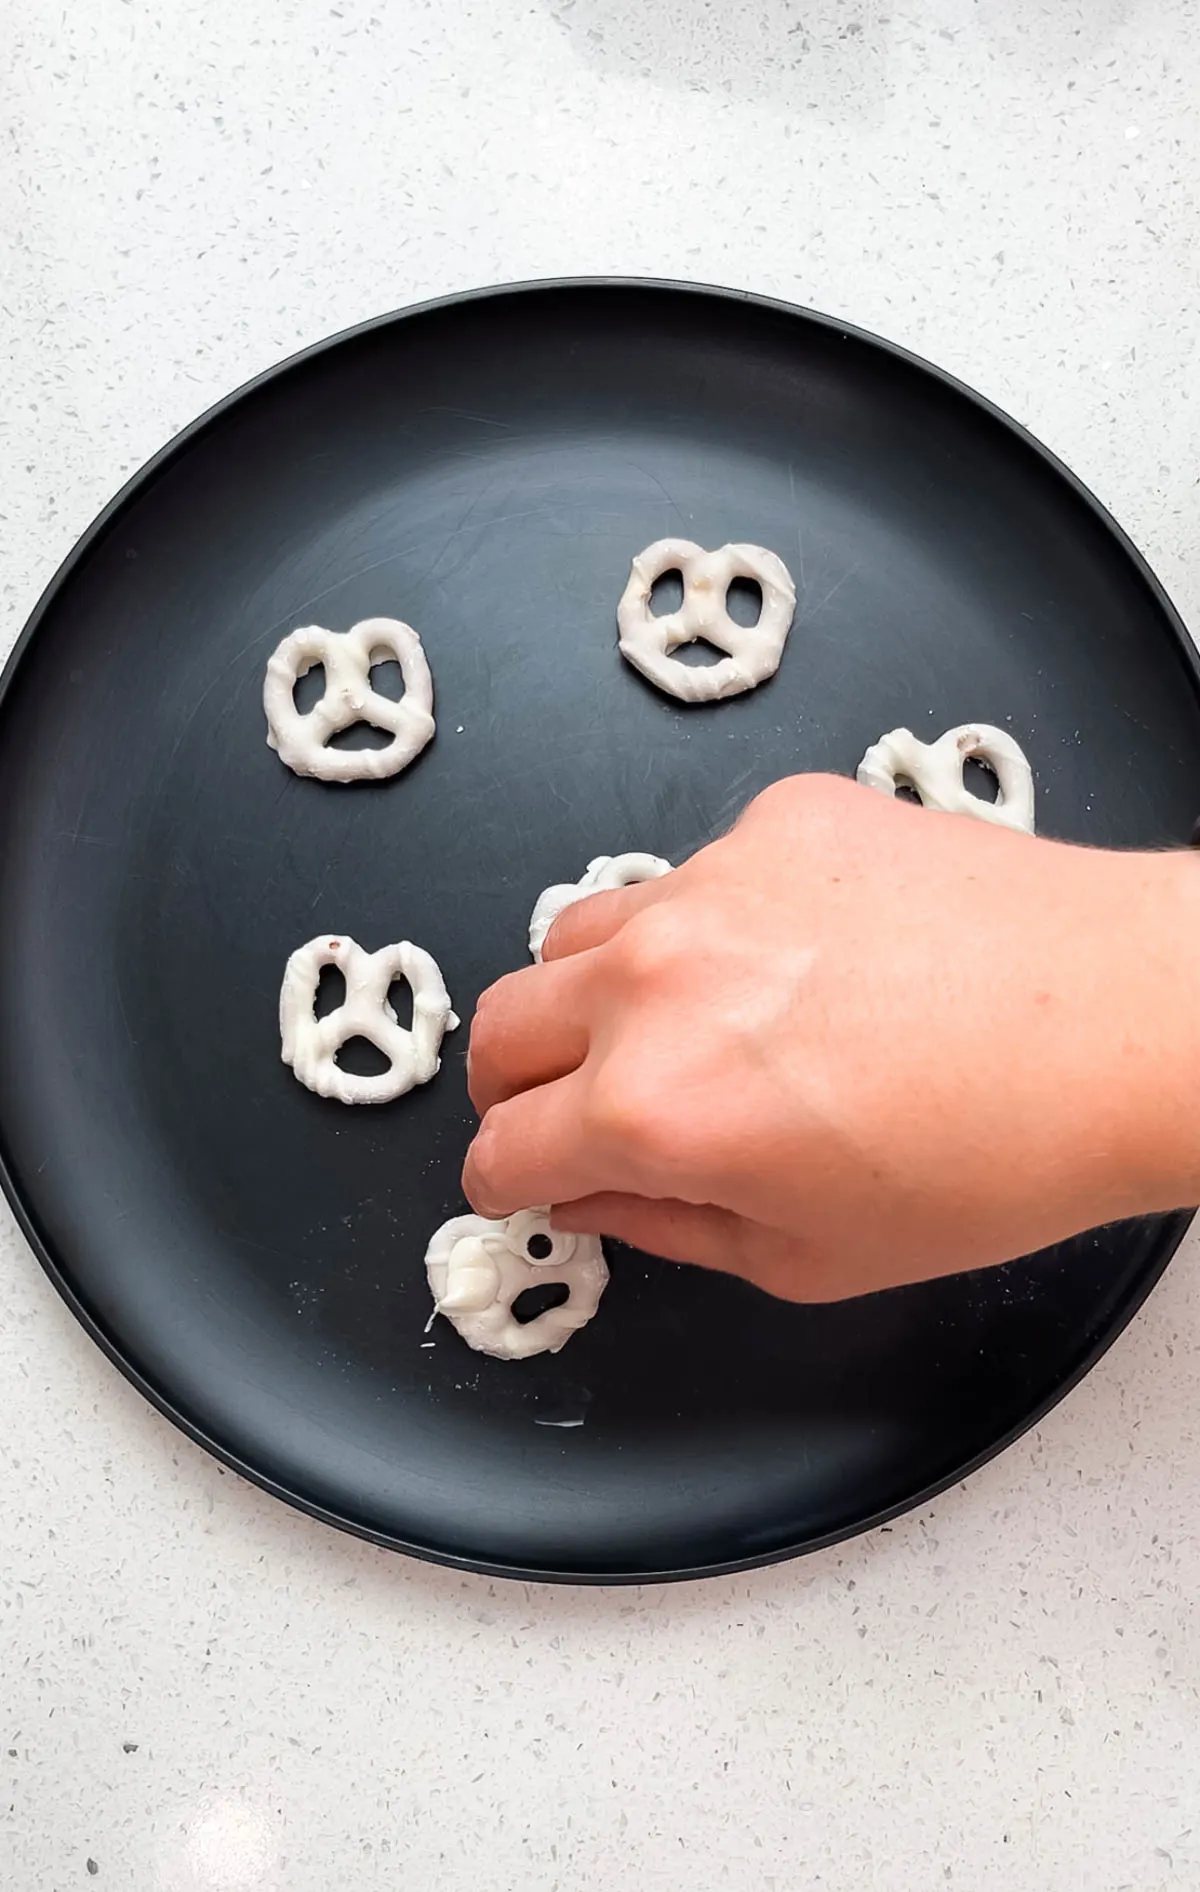 Woman places candy eye on white chocolate pretzels with melted white chocolate.